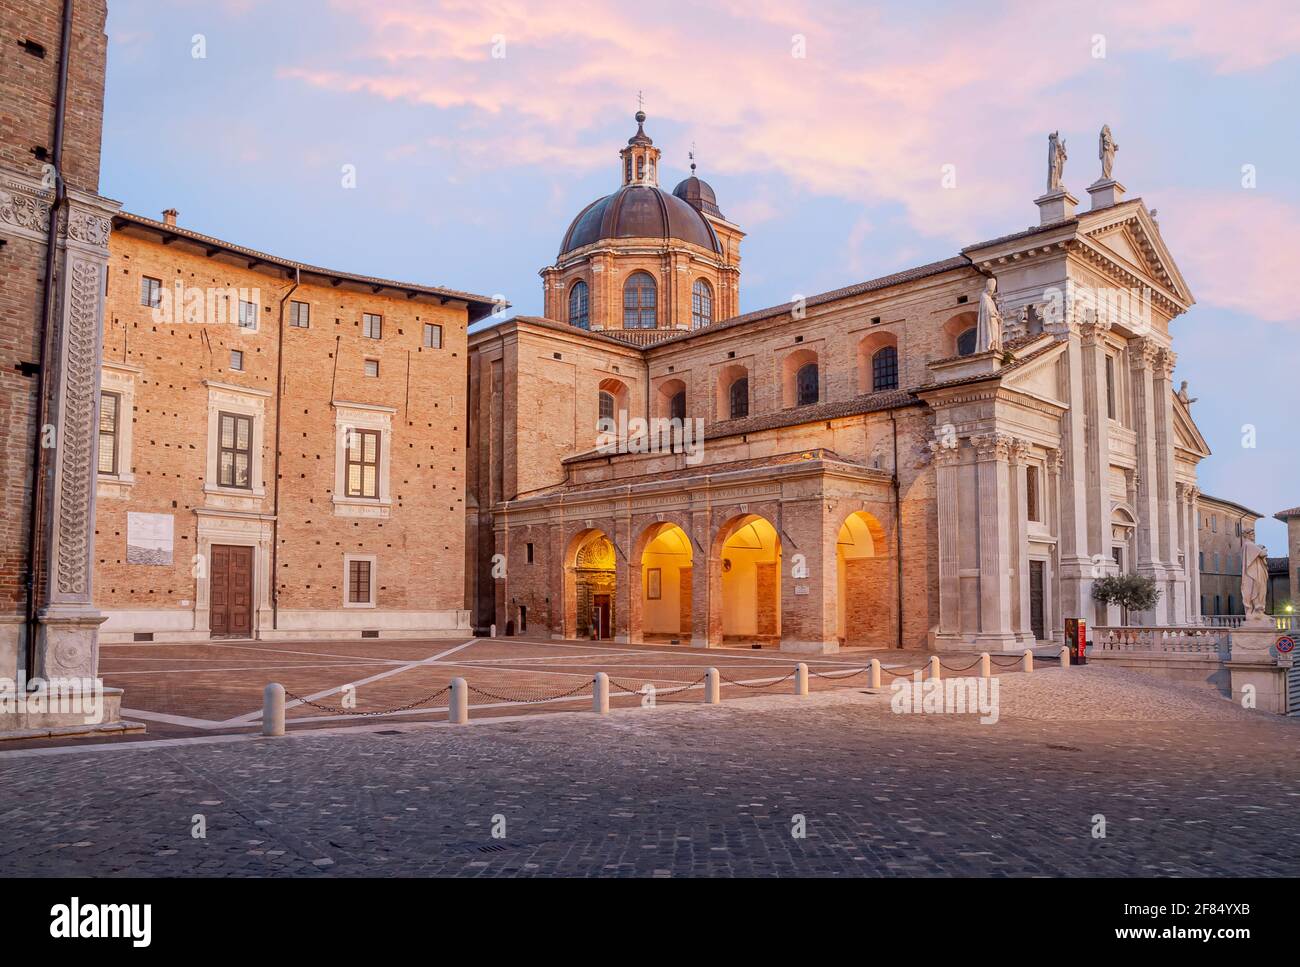 Duomo of Urbino (cathedral), Marche, Italy, founded in 1021 over a 6th century religious edifice Stock Photo